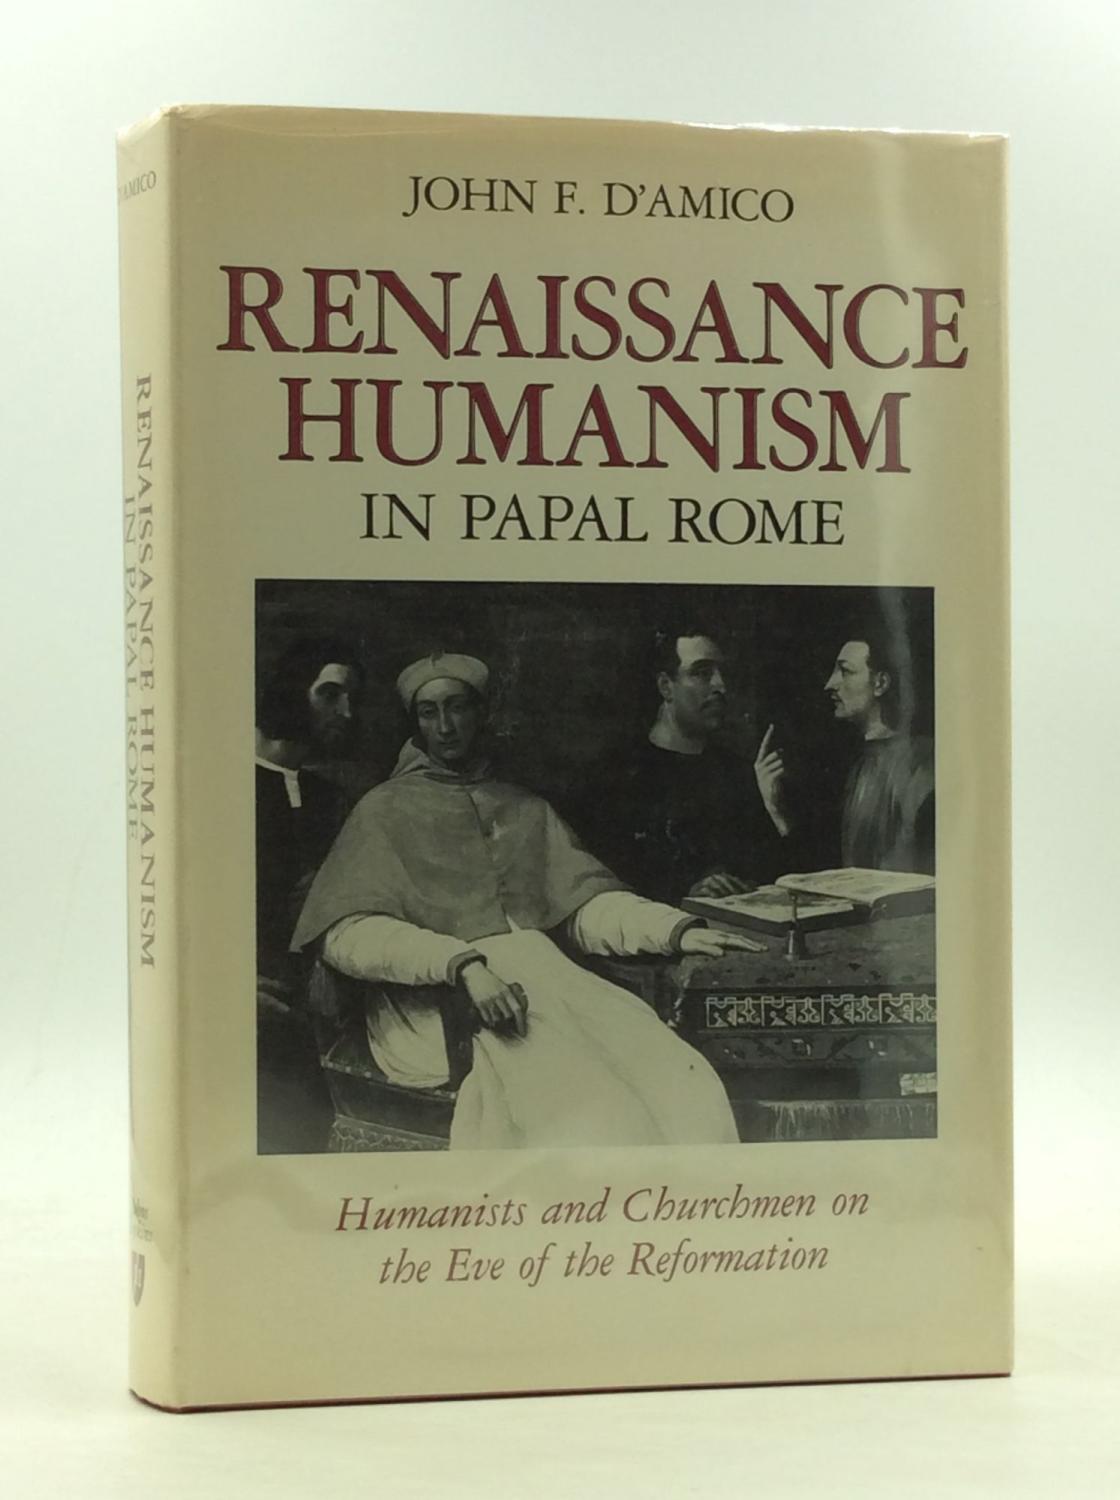 RENAISSANCE HUMANISM IN PAPAL ROME: Humanists and Churchmen on the Eve of the Reformation - John F. d'Amico